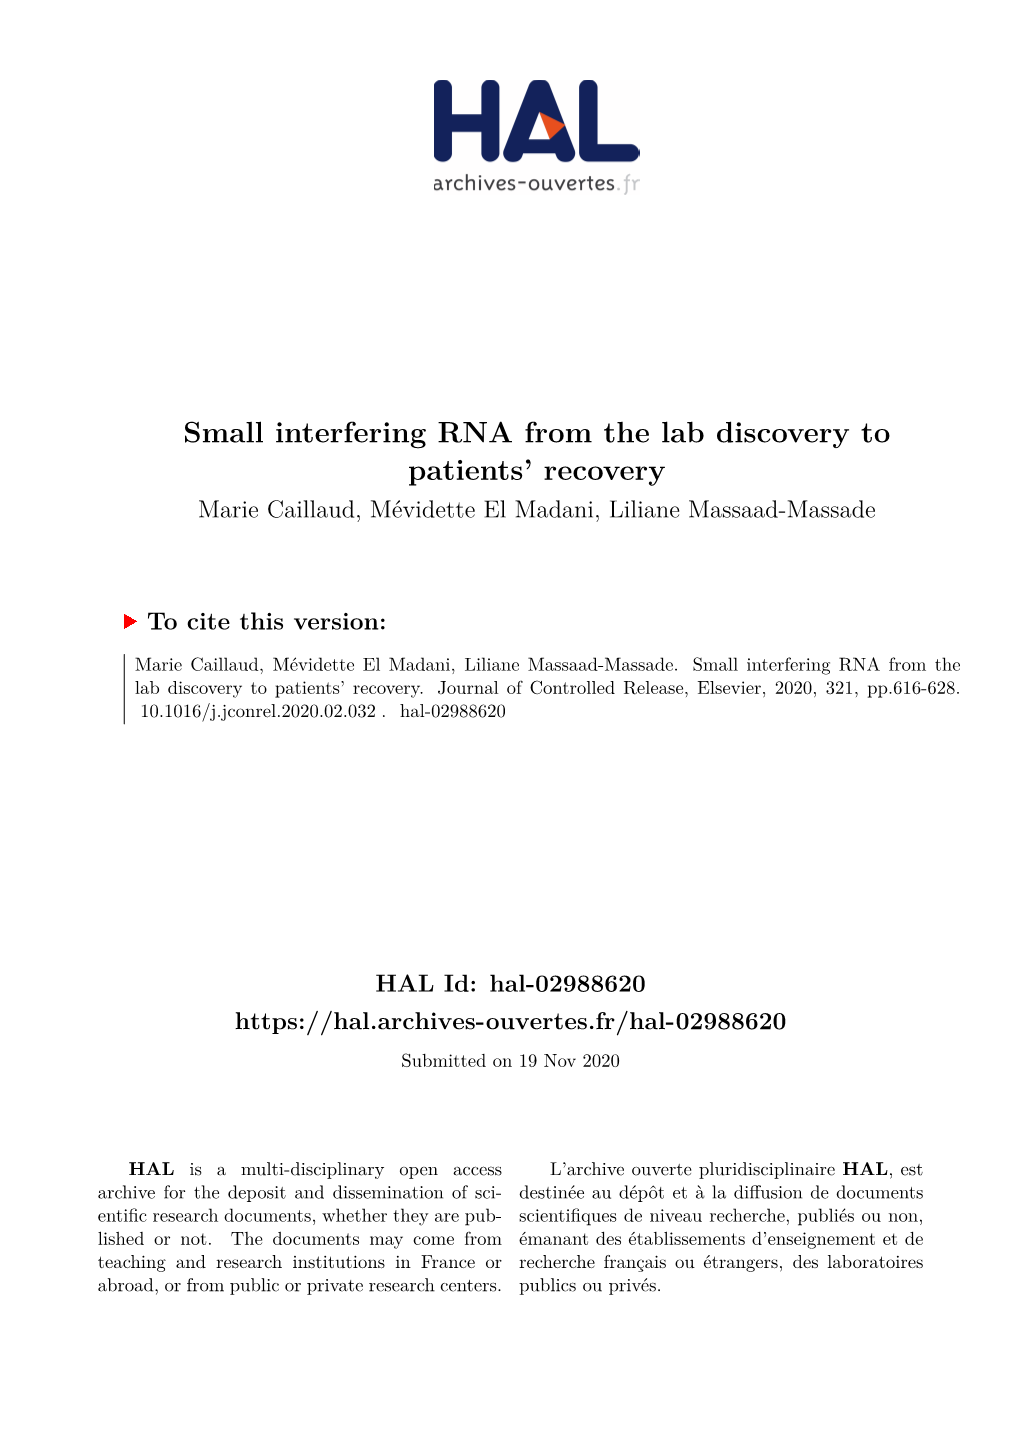 Small Interfering RNA from the Lab Discovery to Patients' Recovery